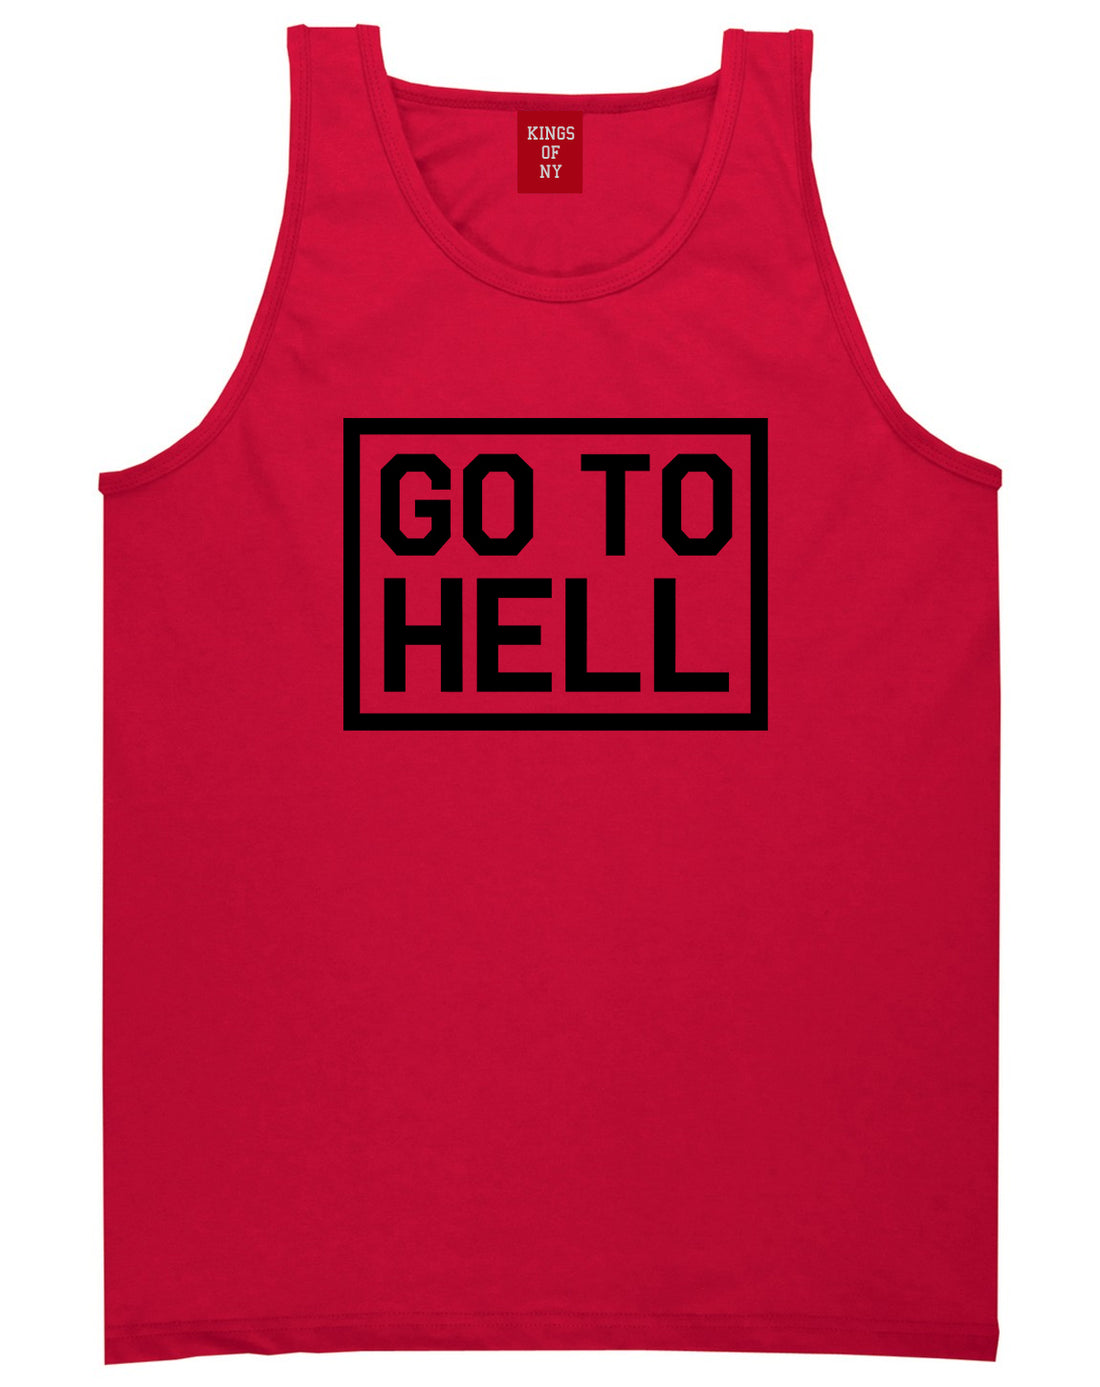 Go To Hell Mens Red Tank Top Shirt by KINGS OF NY